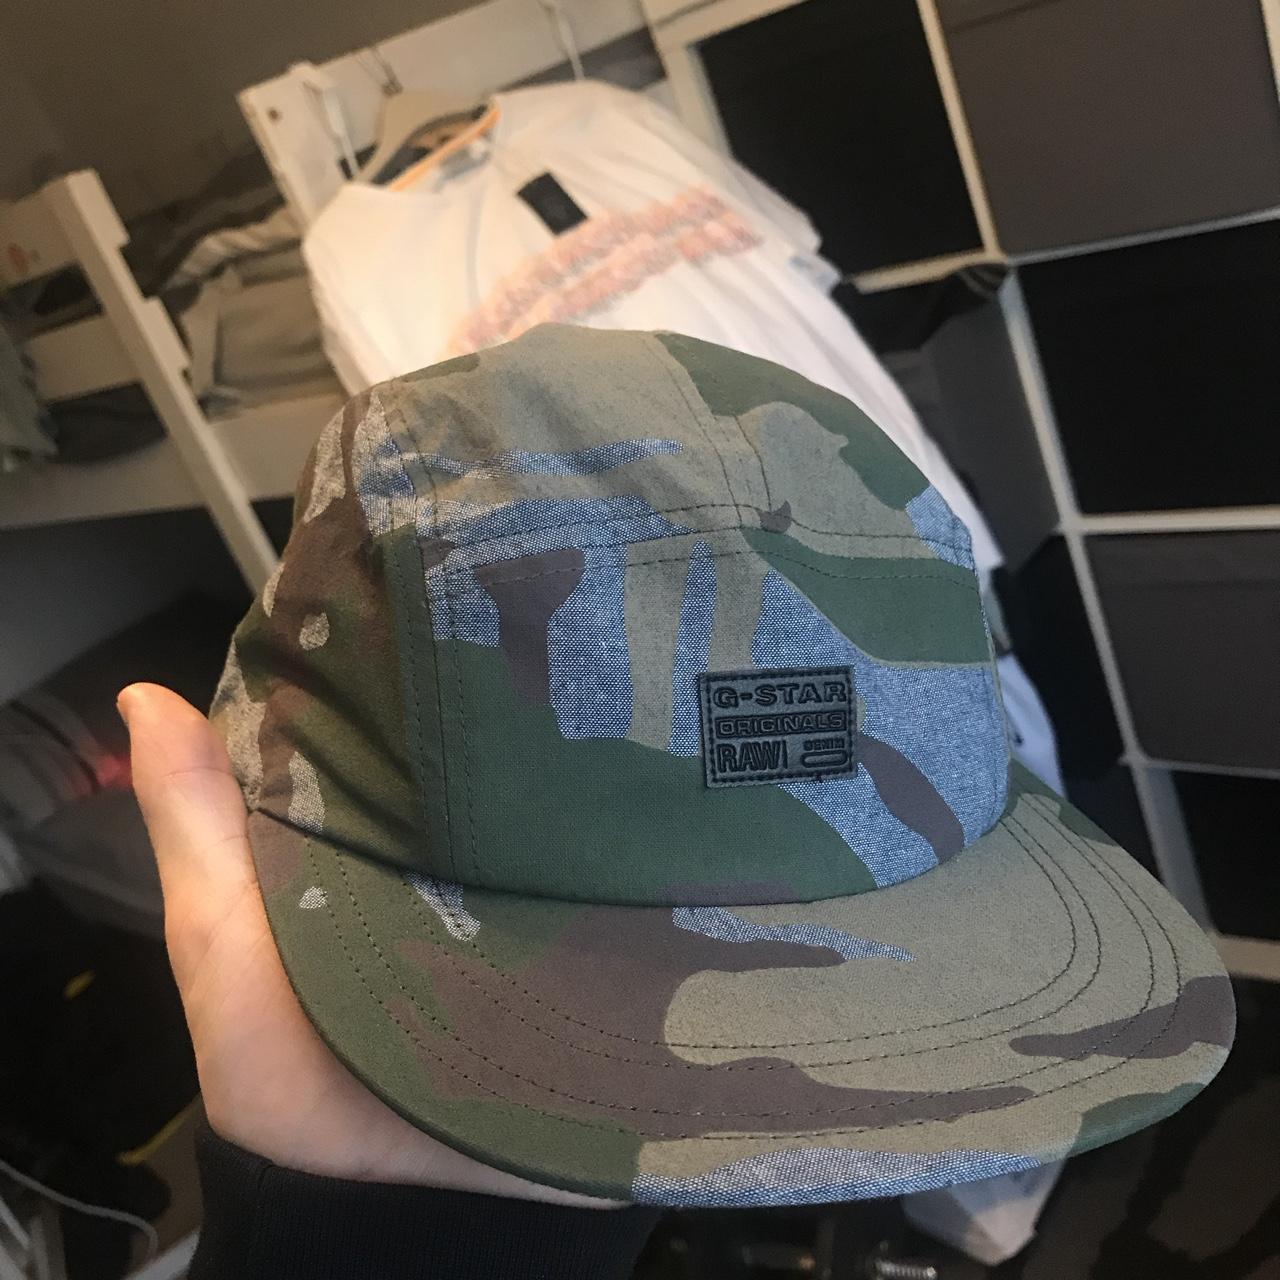 Red Supreme Metallic Camp 5 Panel Hat Check pictures - Depop